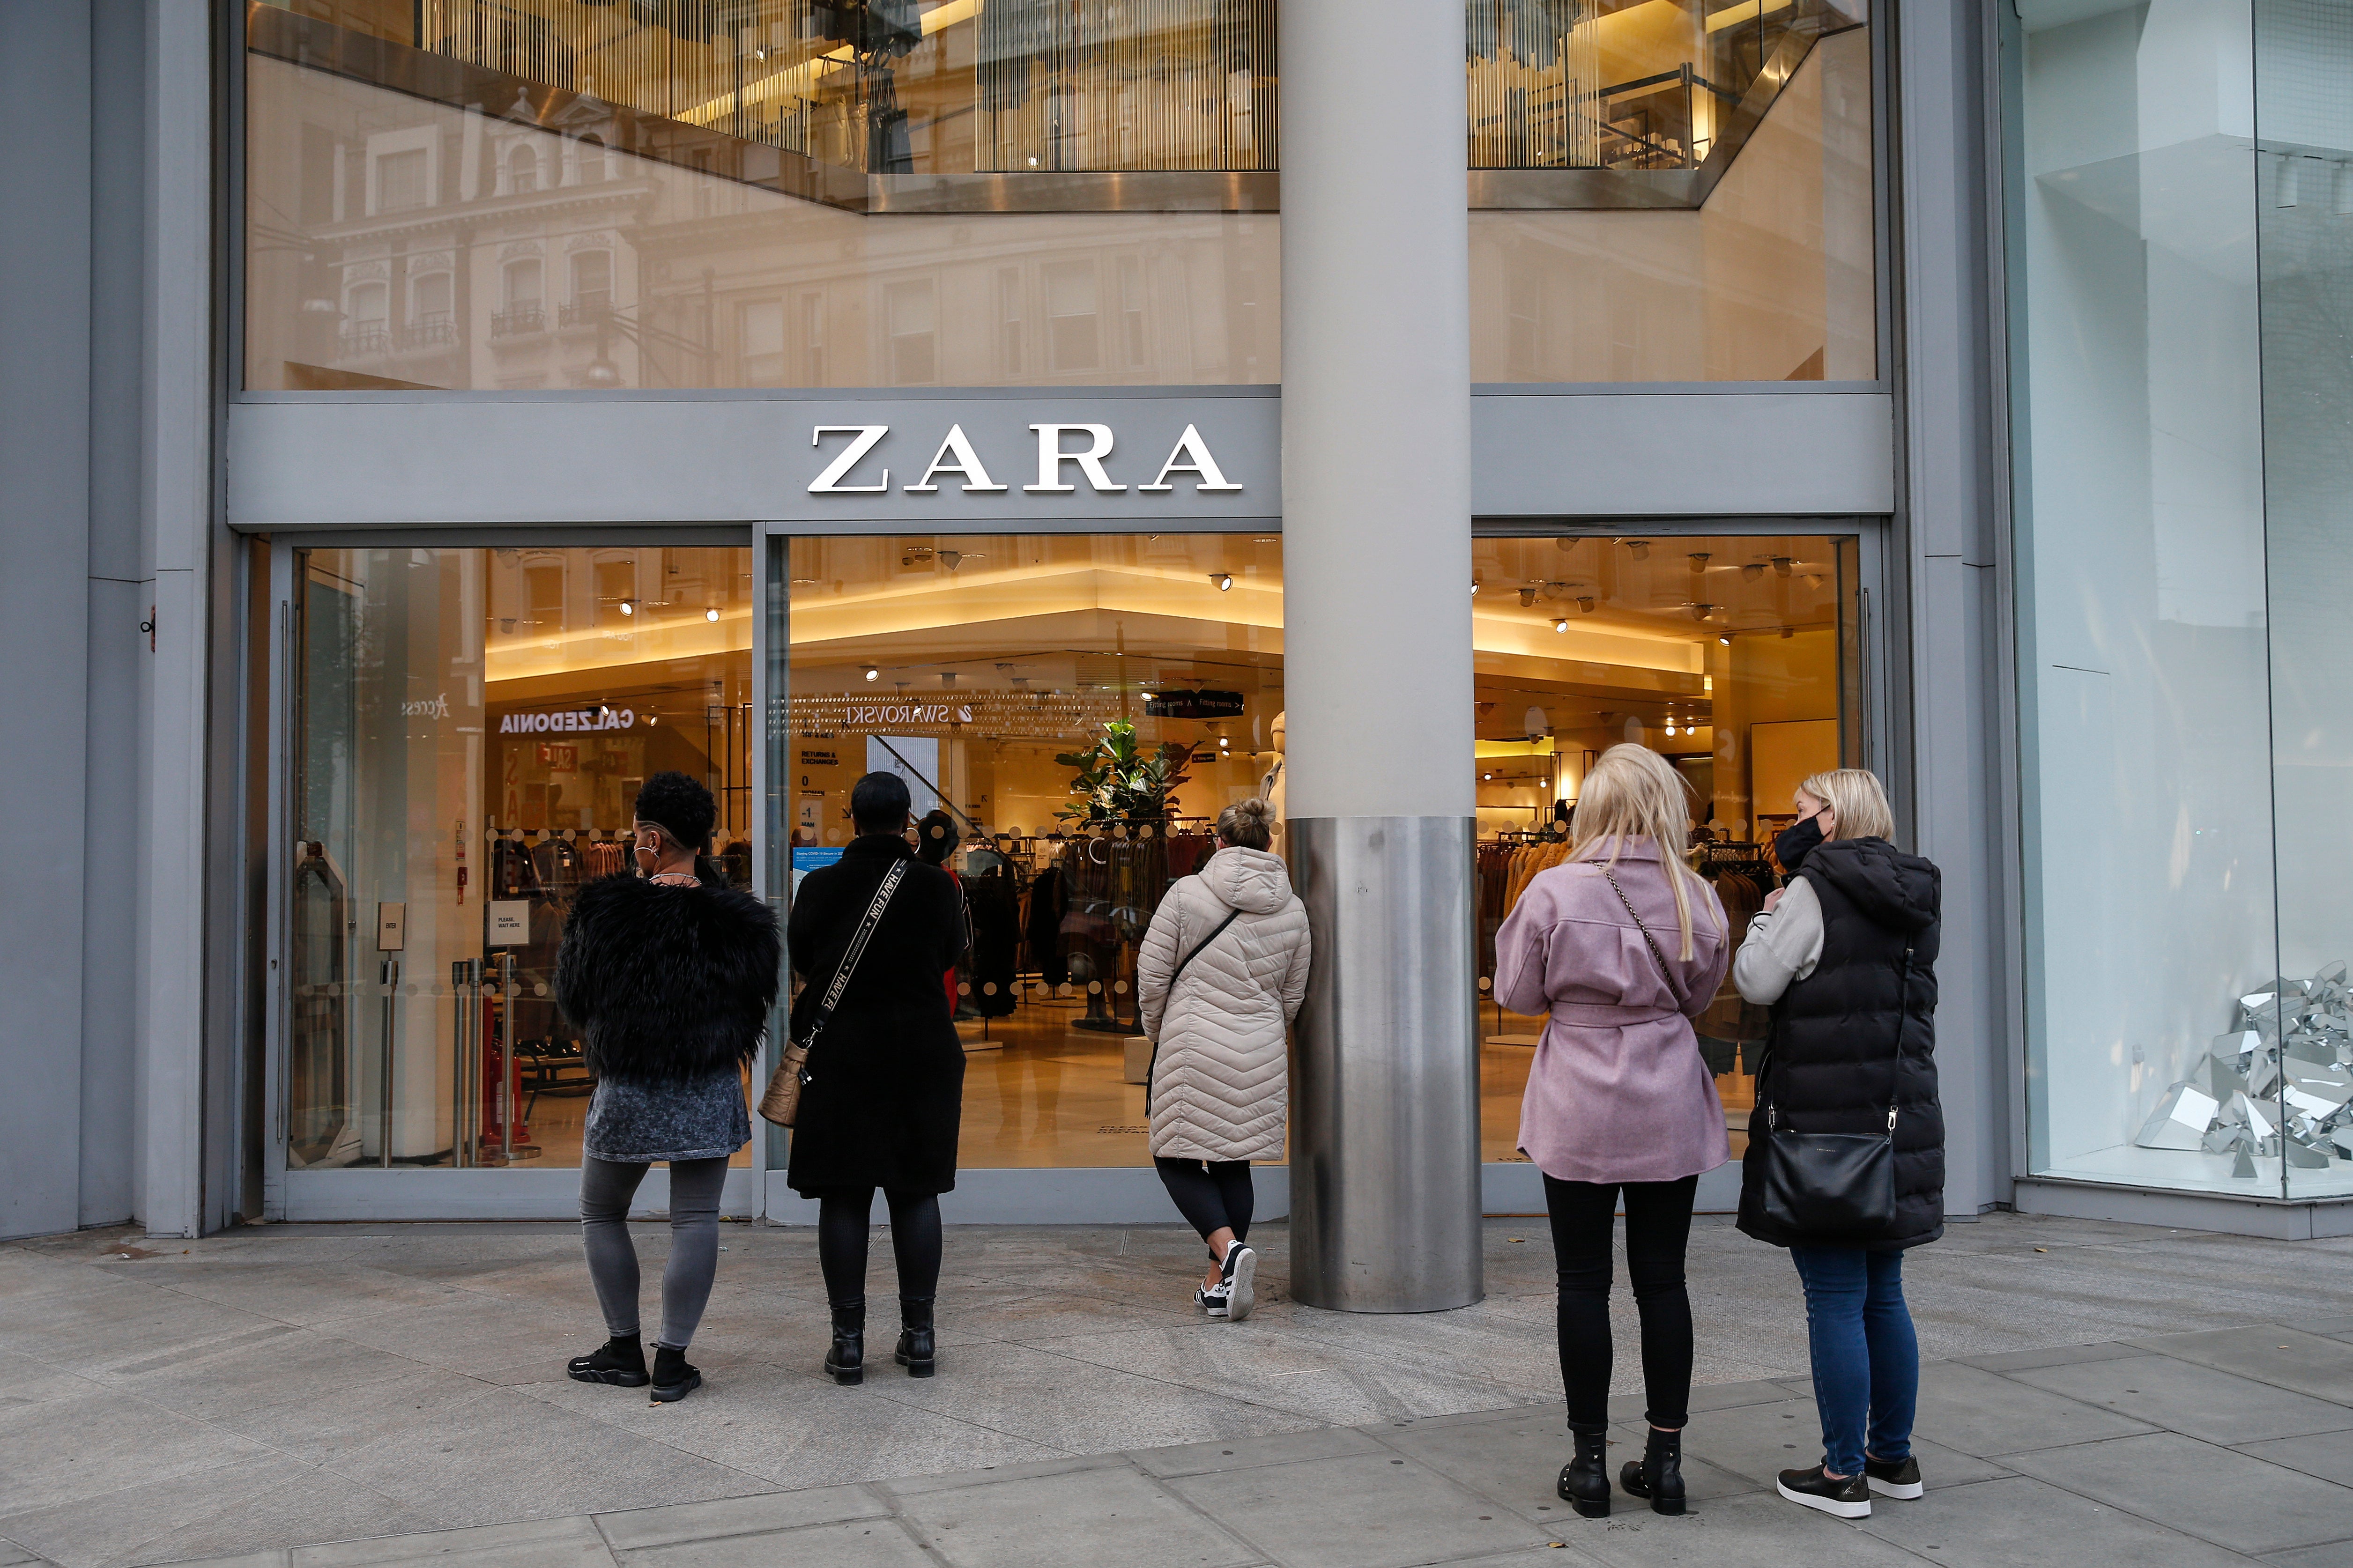 Spanish retailer Zara was one of those who sought to emulate Gap and Benetton’s success